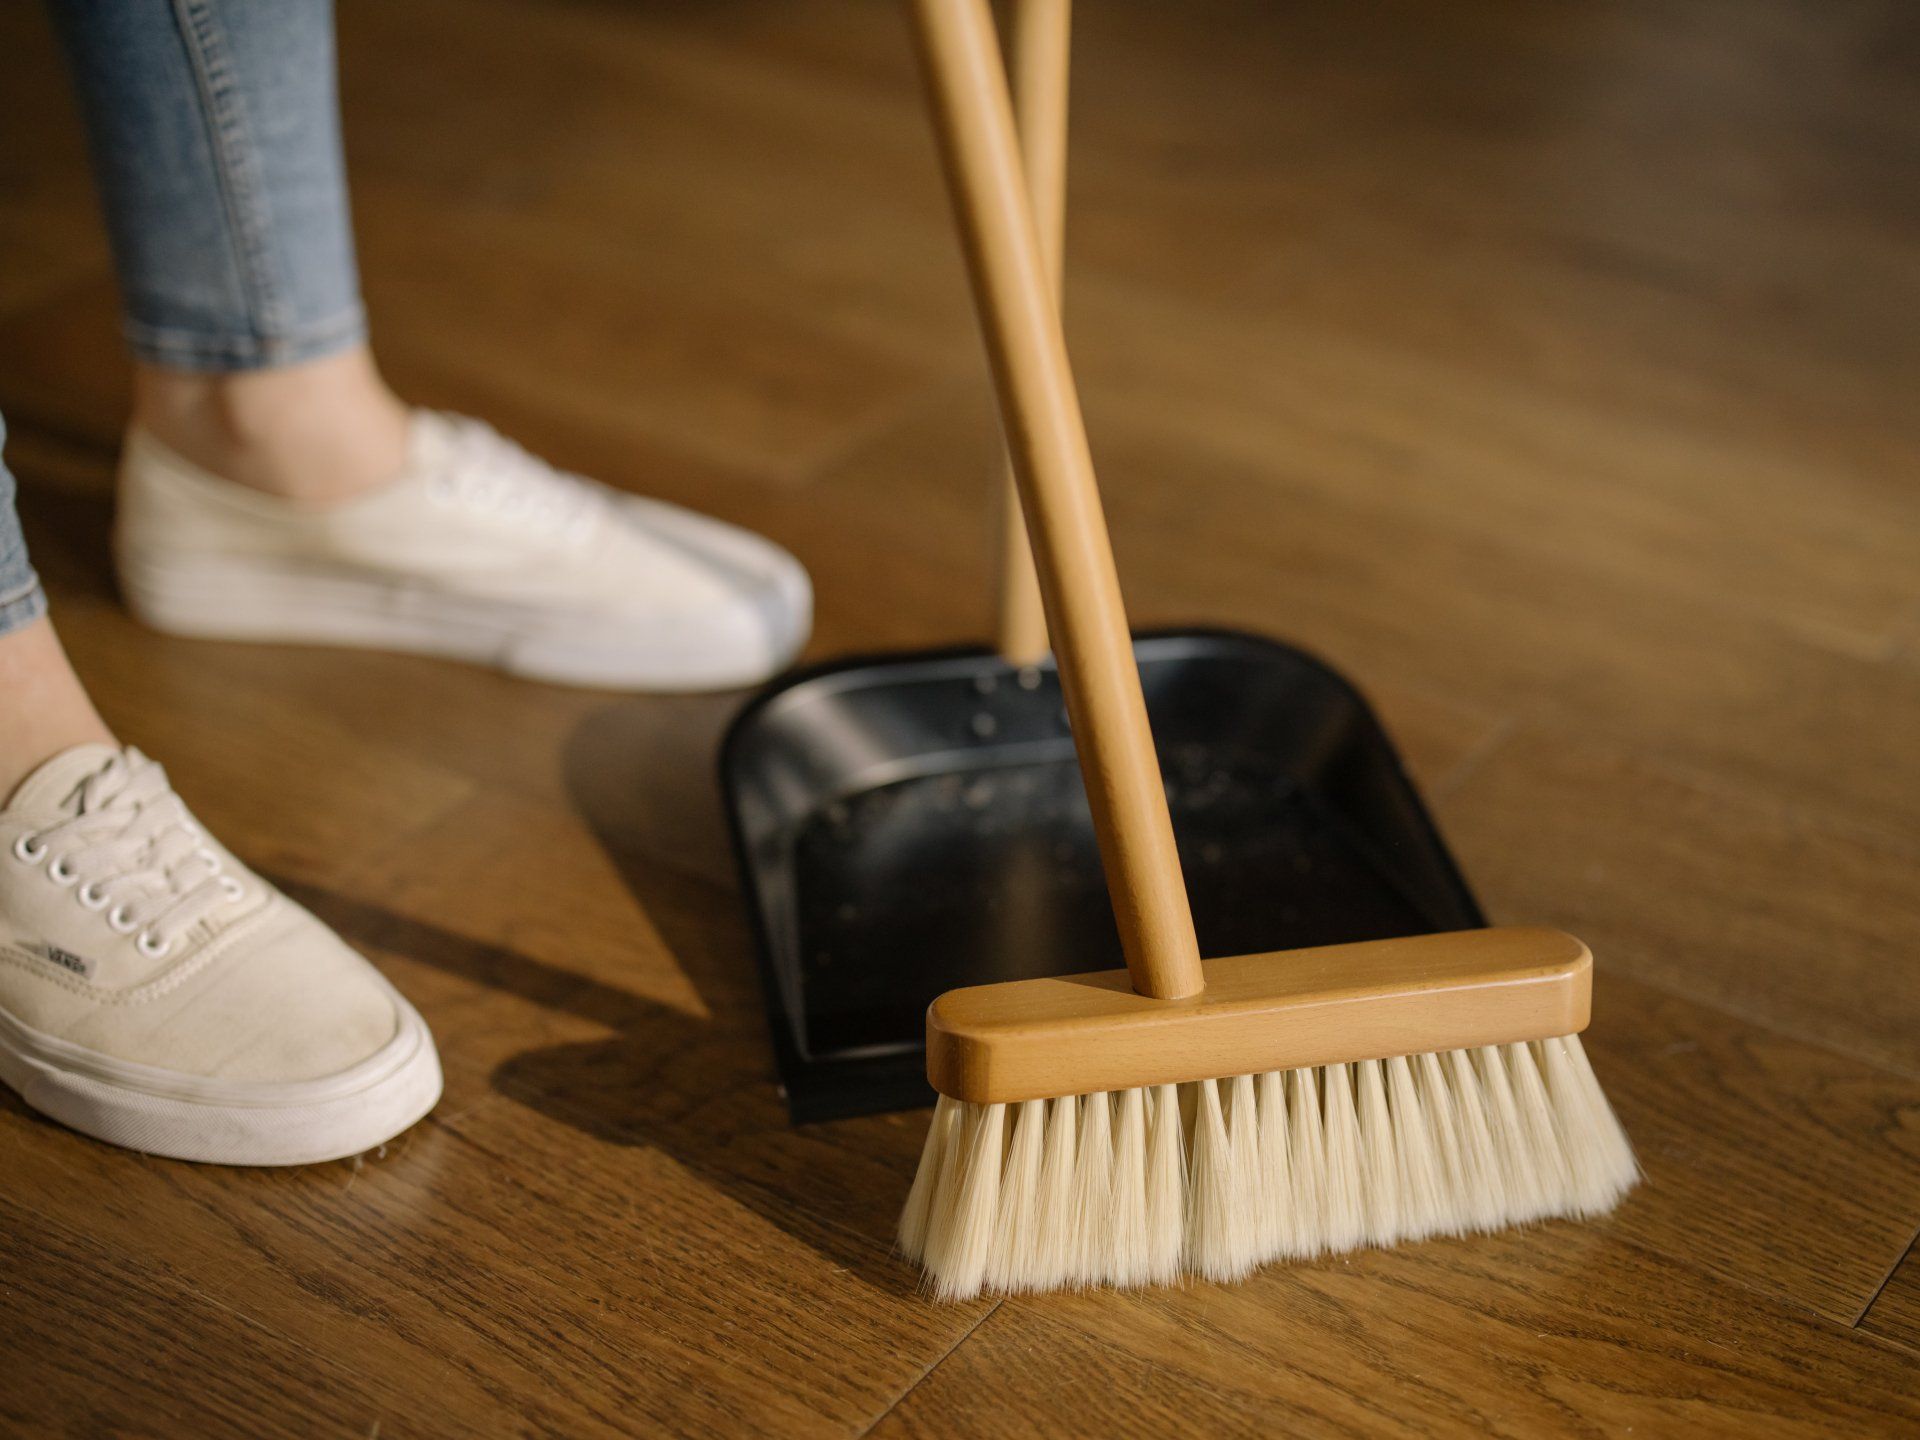 Cleaner sweeping the floor with a broom and collecting debris into a dustpan.